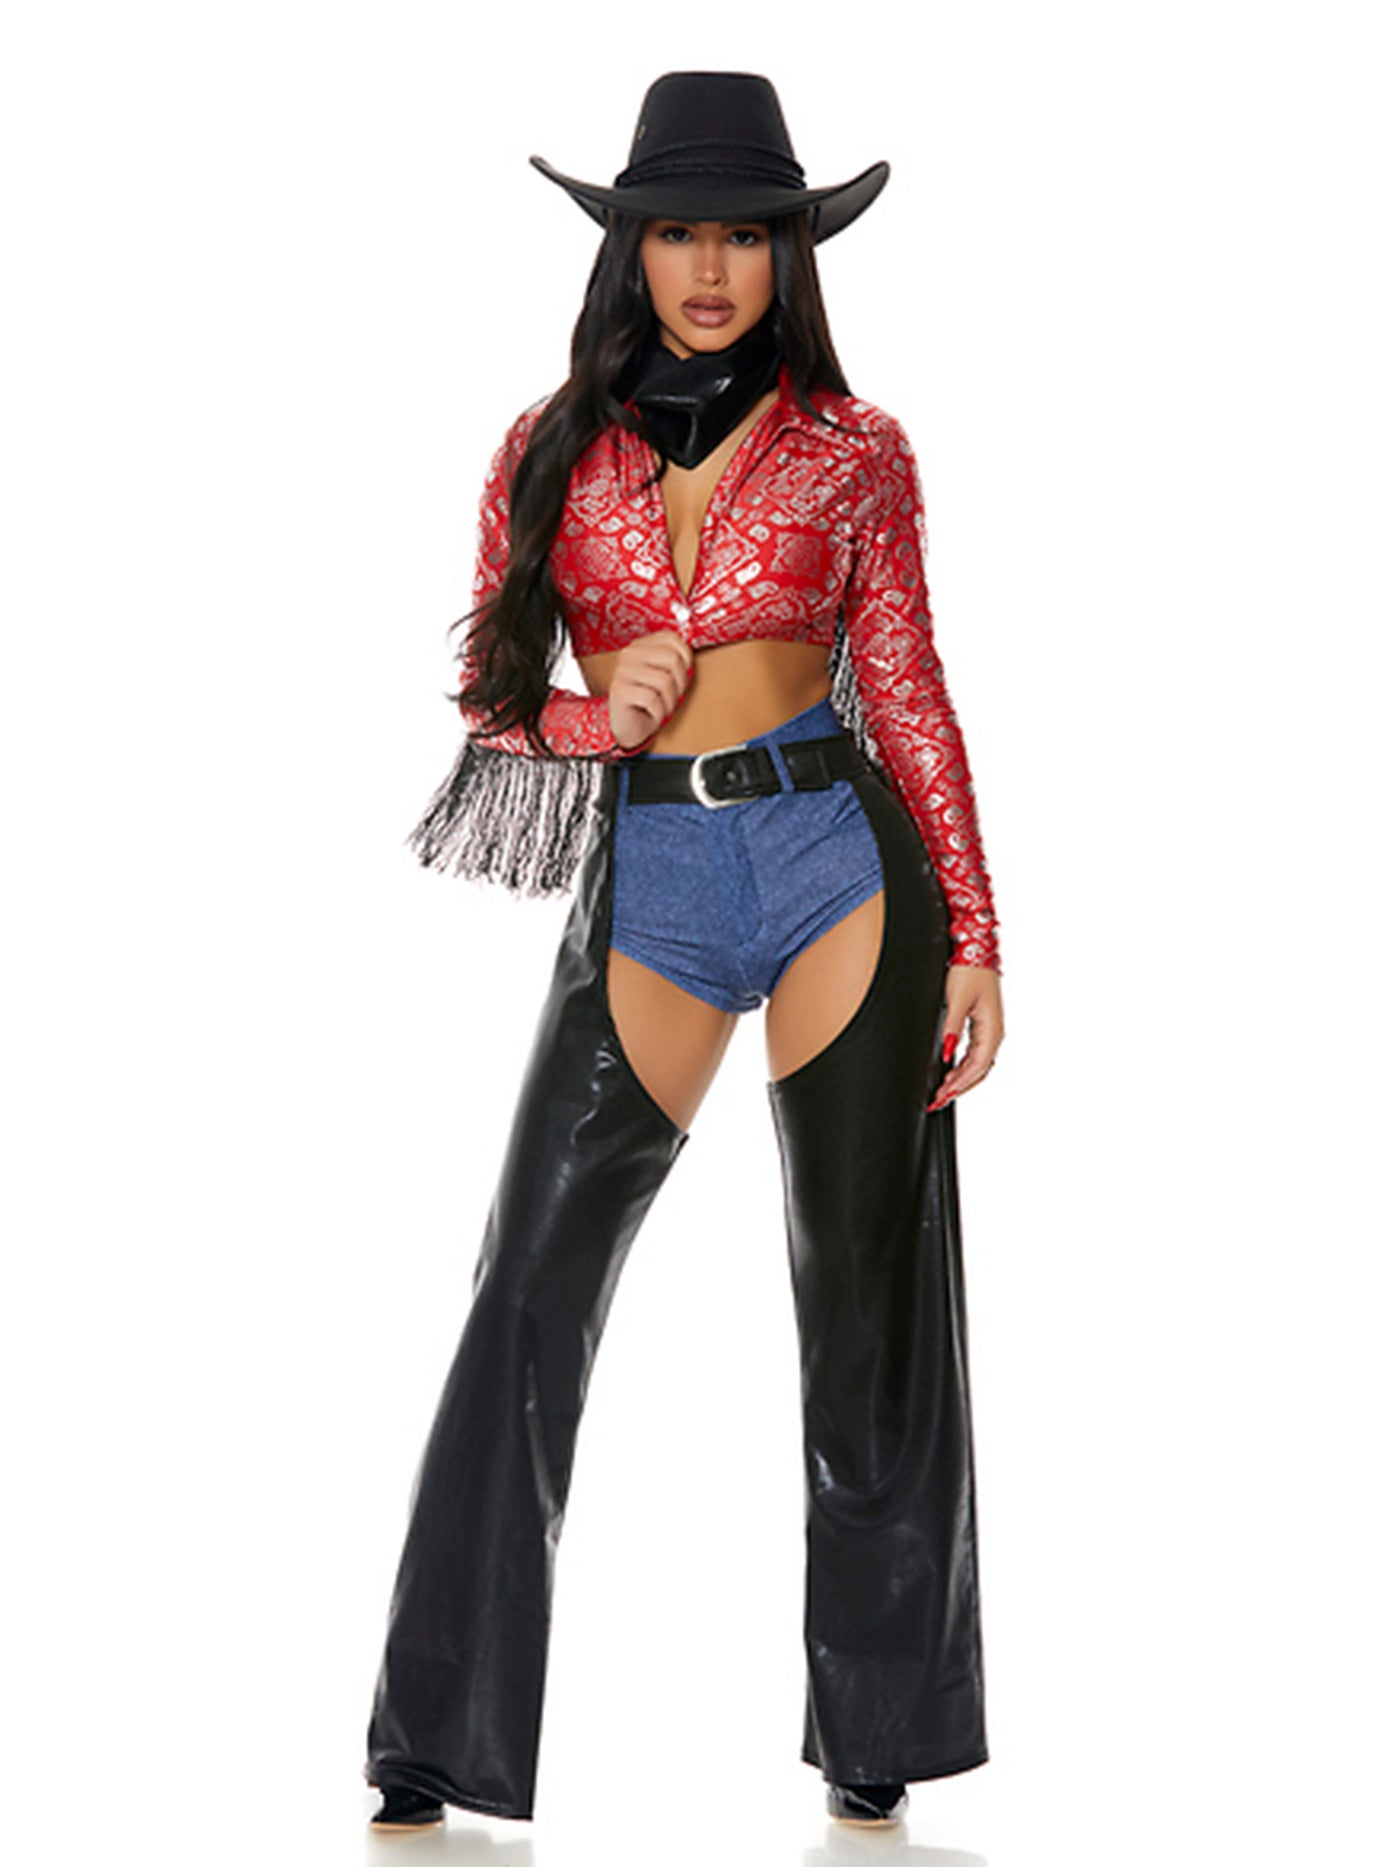 Saddle Up Sexy Cowgirl Costume